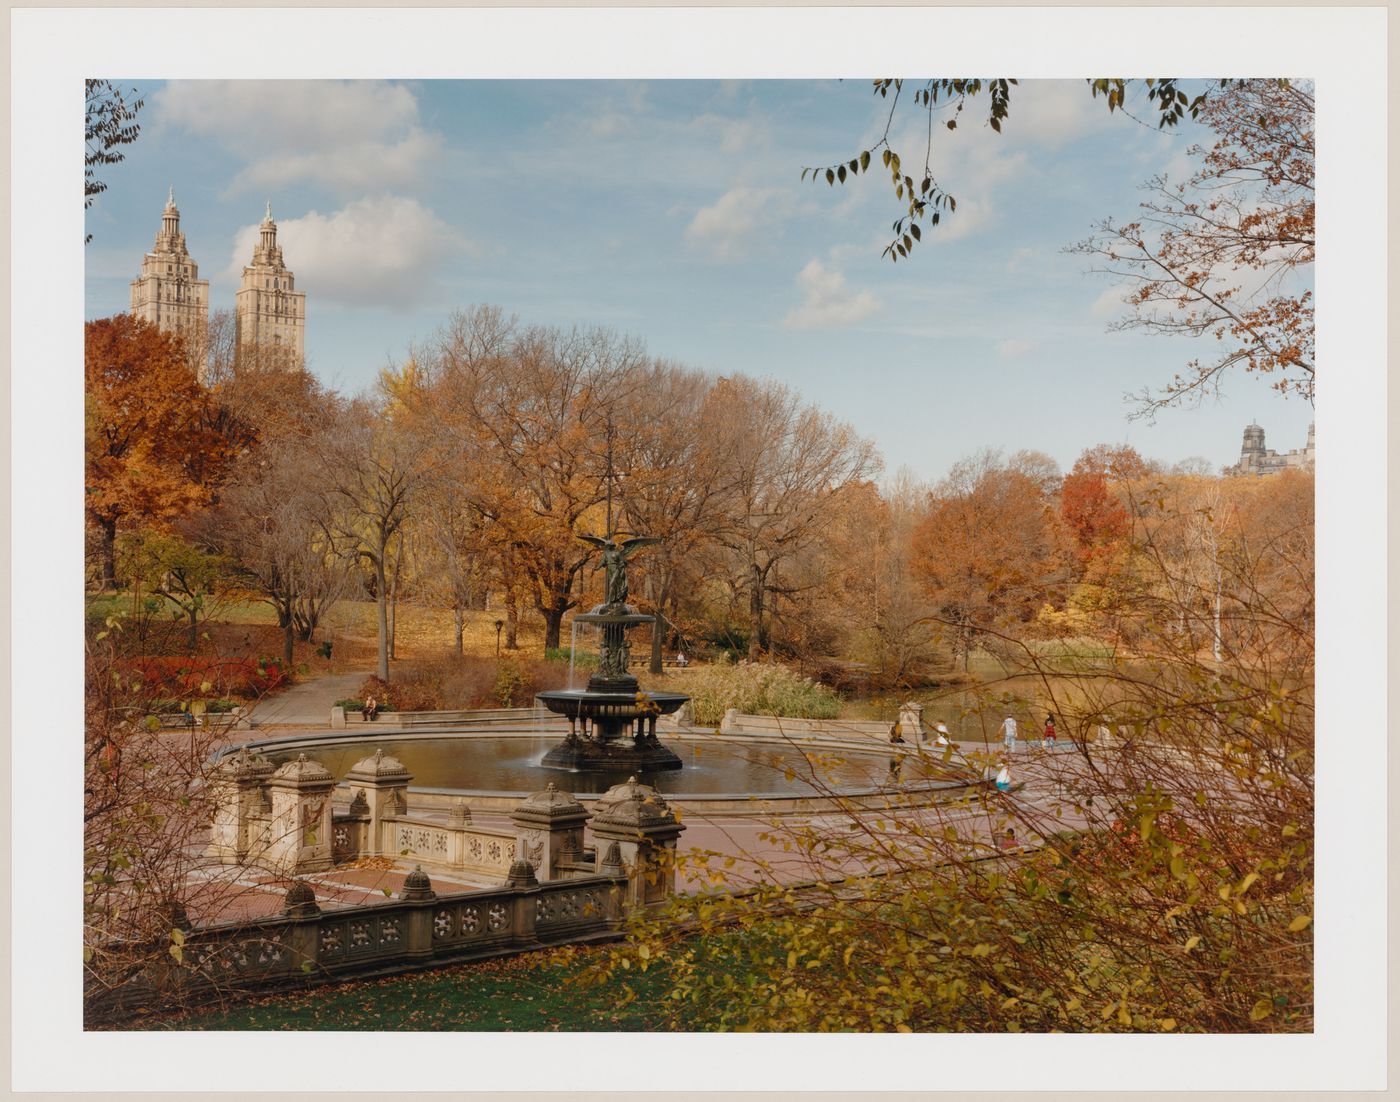 Viewing Olmsted: View of The Fountain, Bethesda Terrace, Central Park, Manhattan, New York City, New York